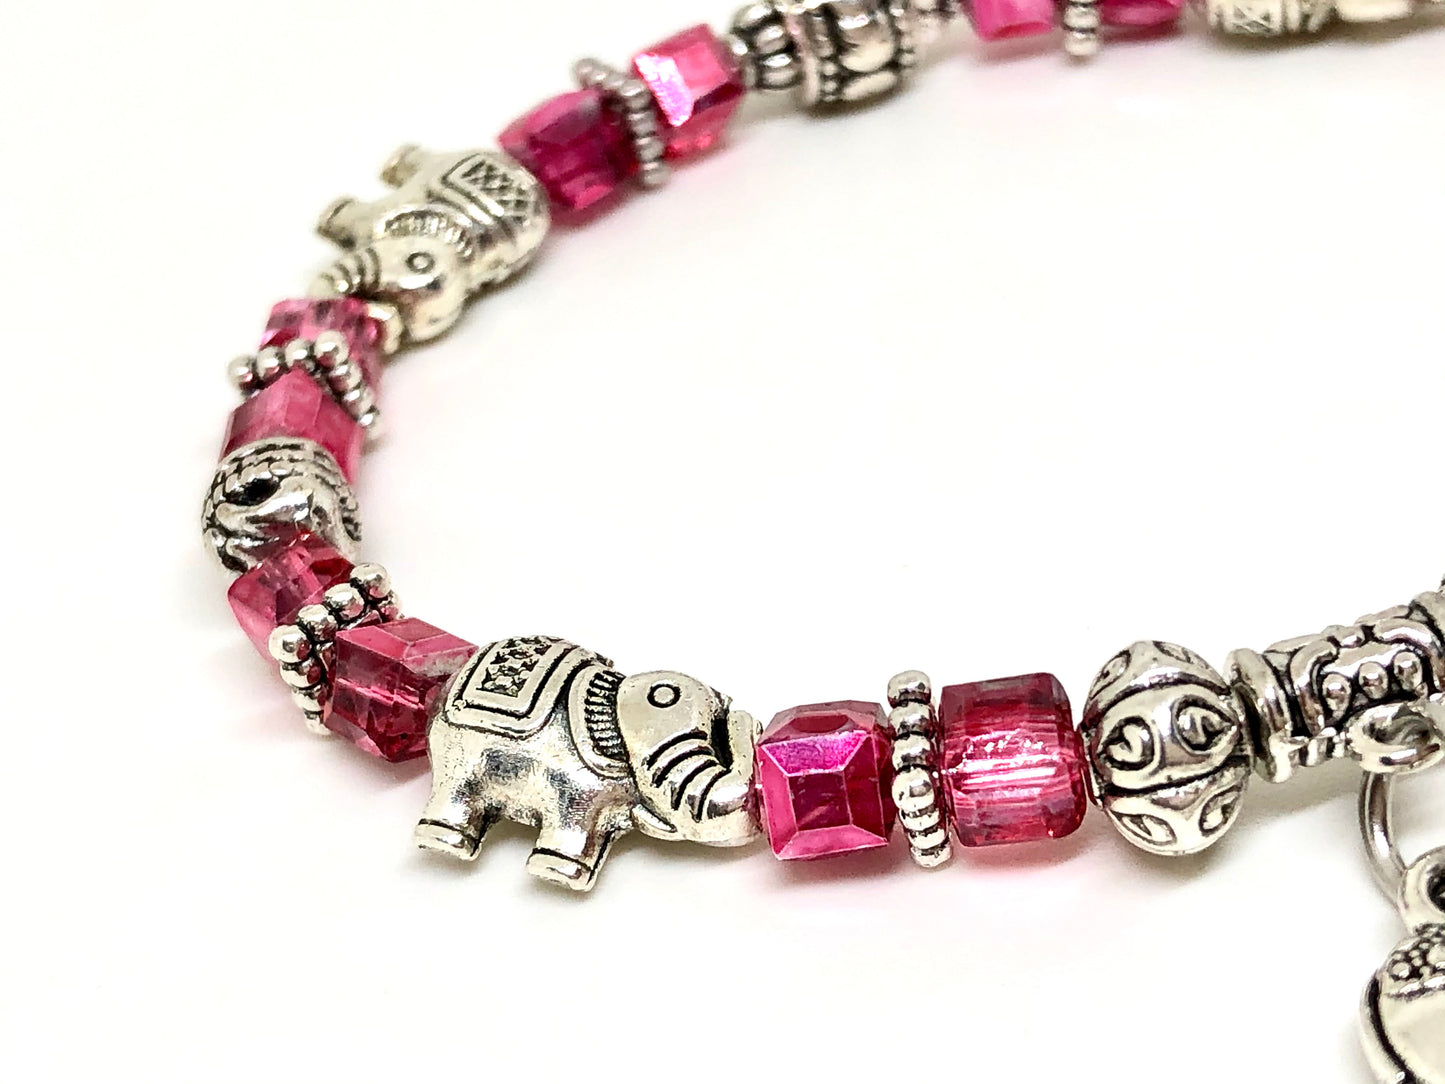 Elephant Stretch Bracelet - Crystal Bead Bracelet 13 COLORS - Pink Metalic, Good Luck Strength and Wisdom Symbol - Cheer and Dance On Demand